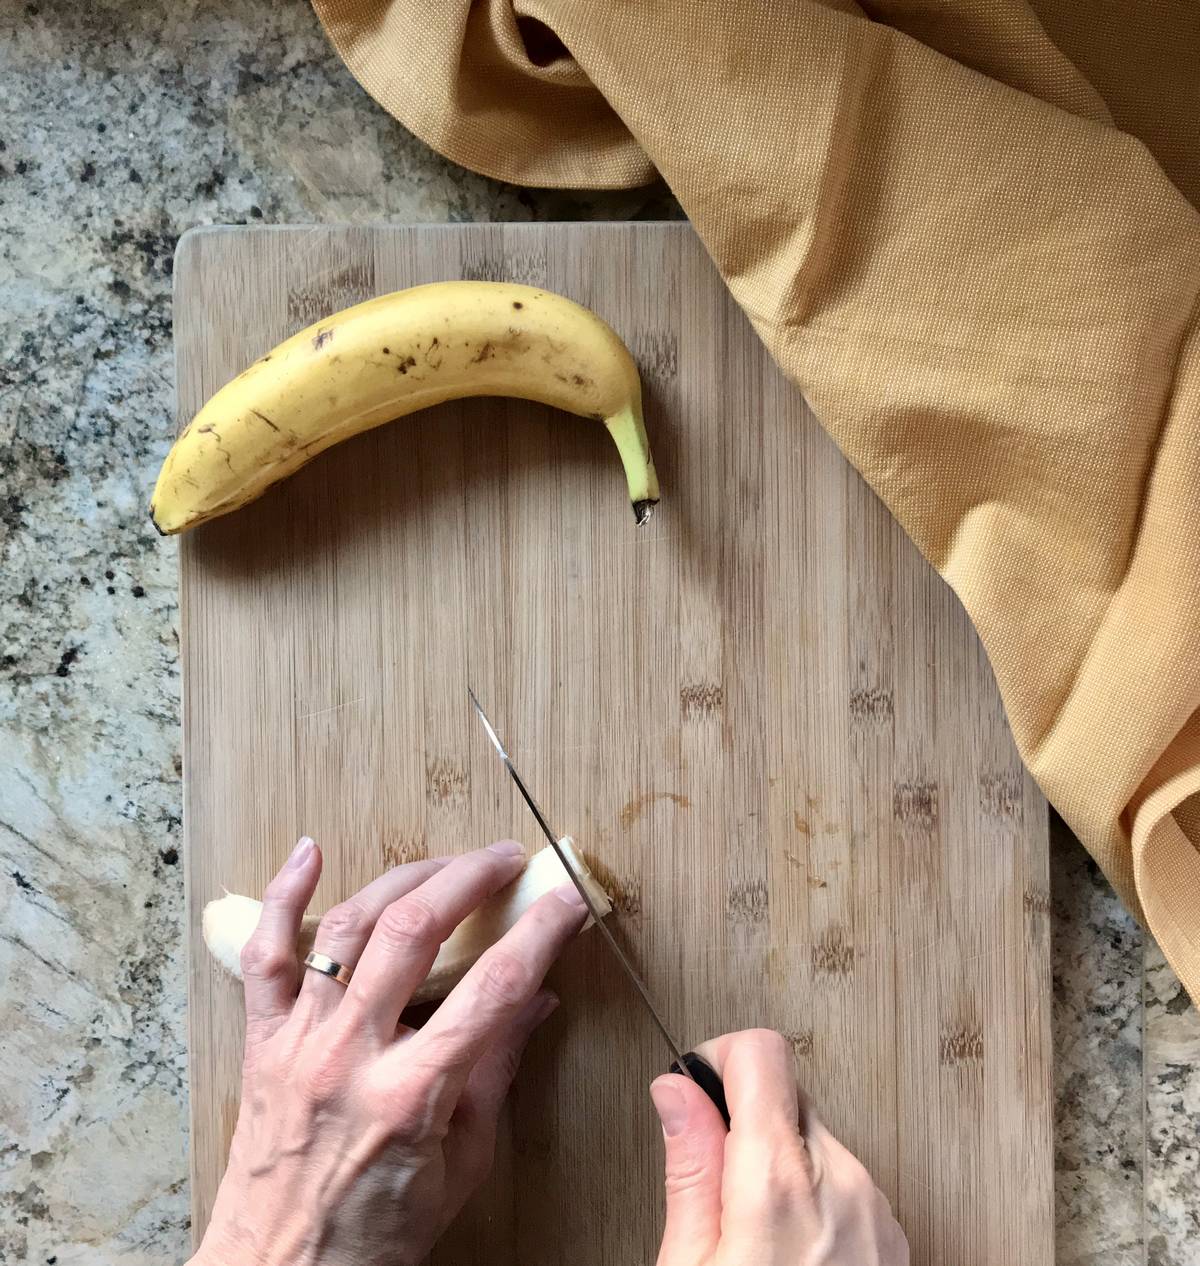 A banana in the process of being sliced.